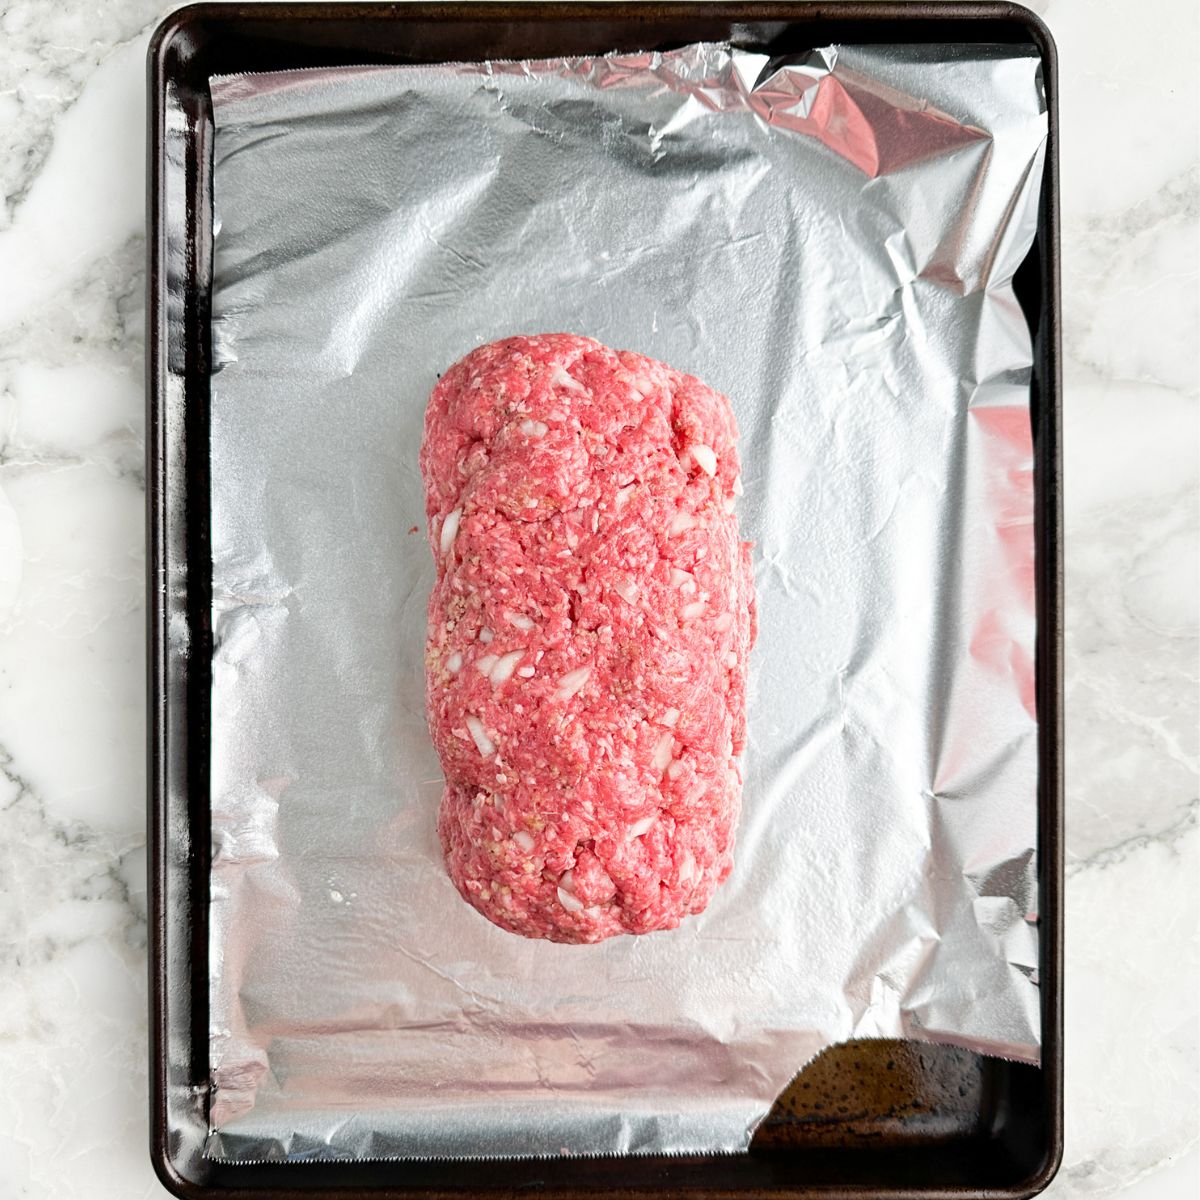 Uncooked meatloaf on a baking pan. 